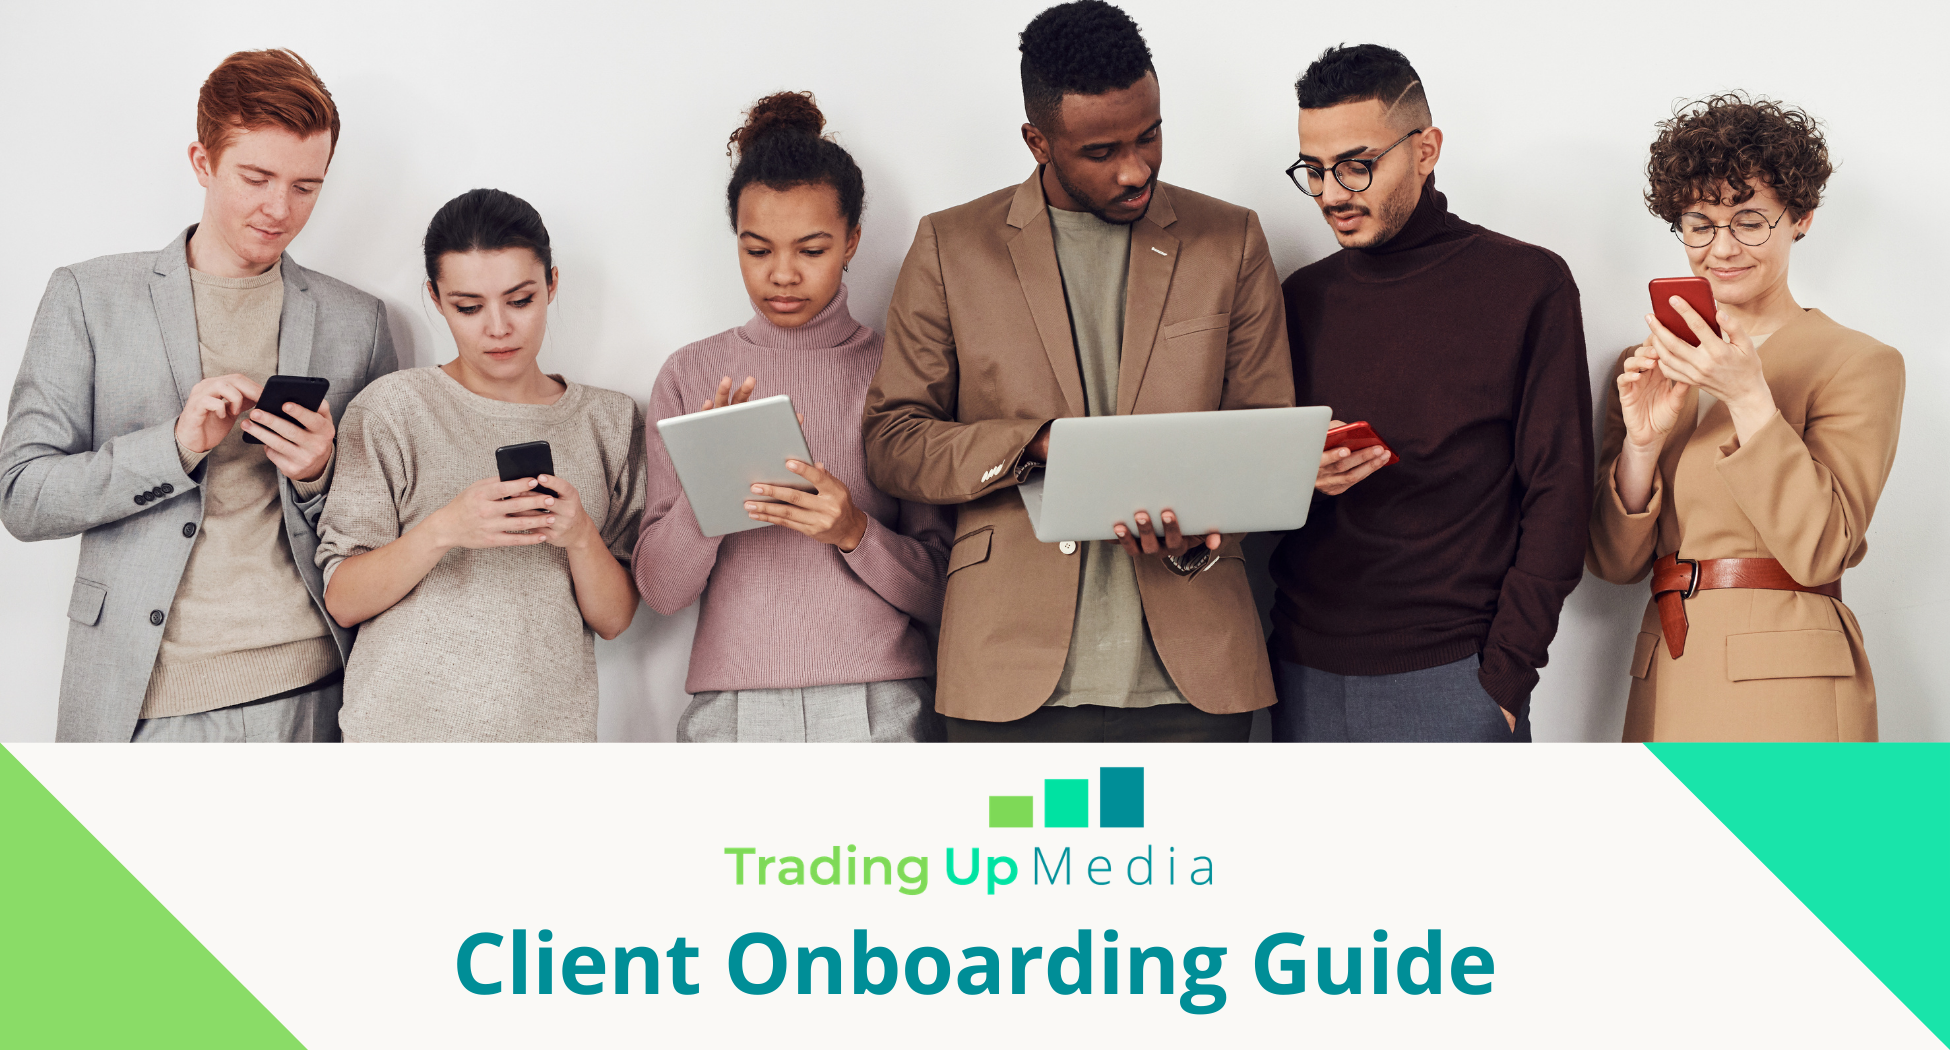 Our Client Onboarding Guide